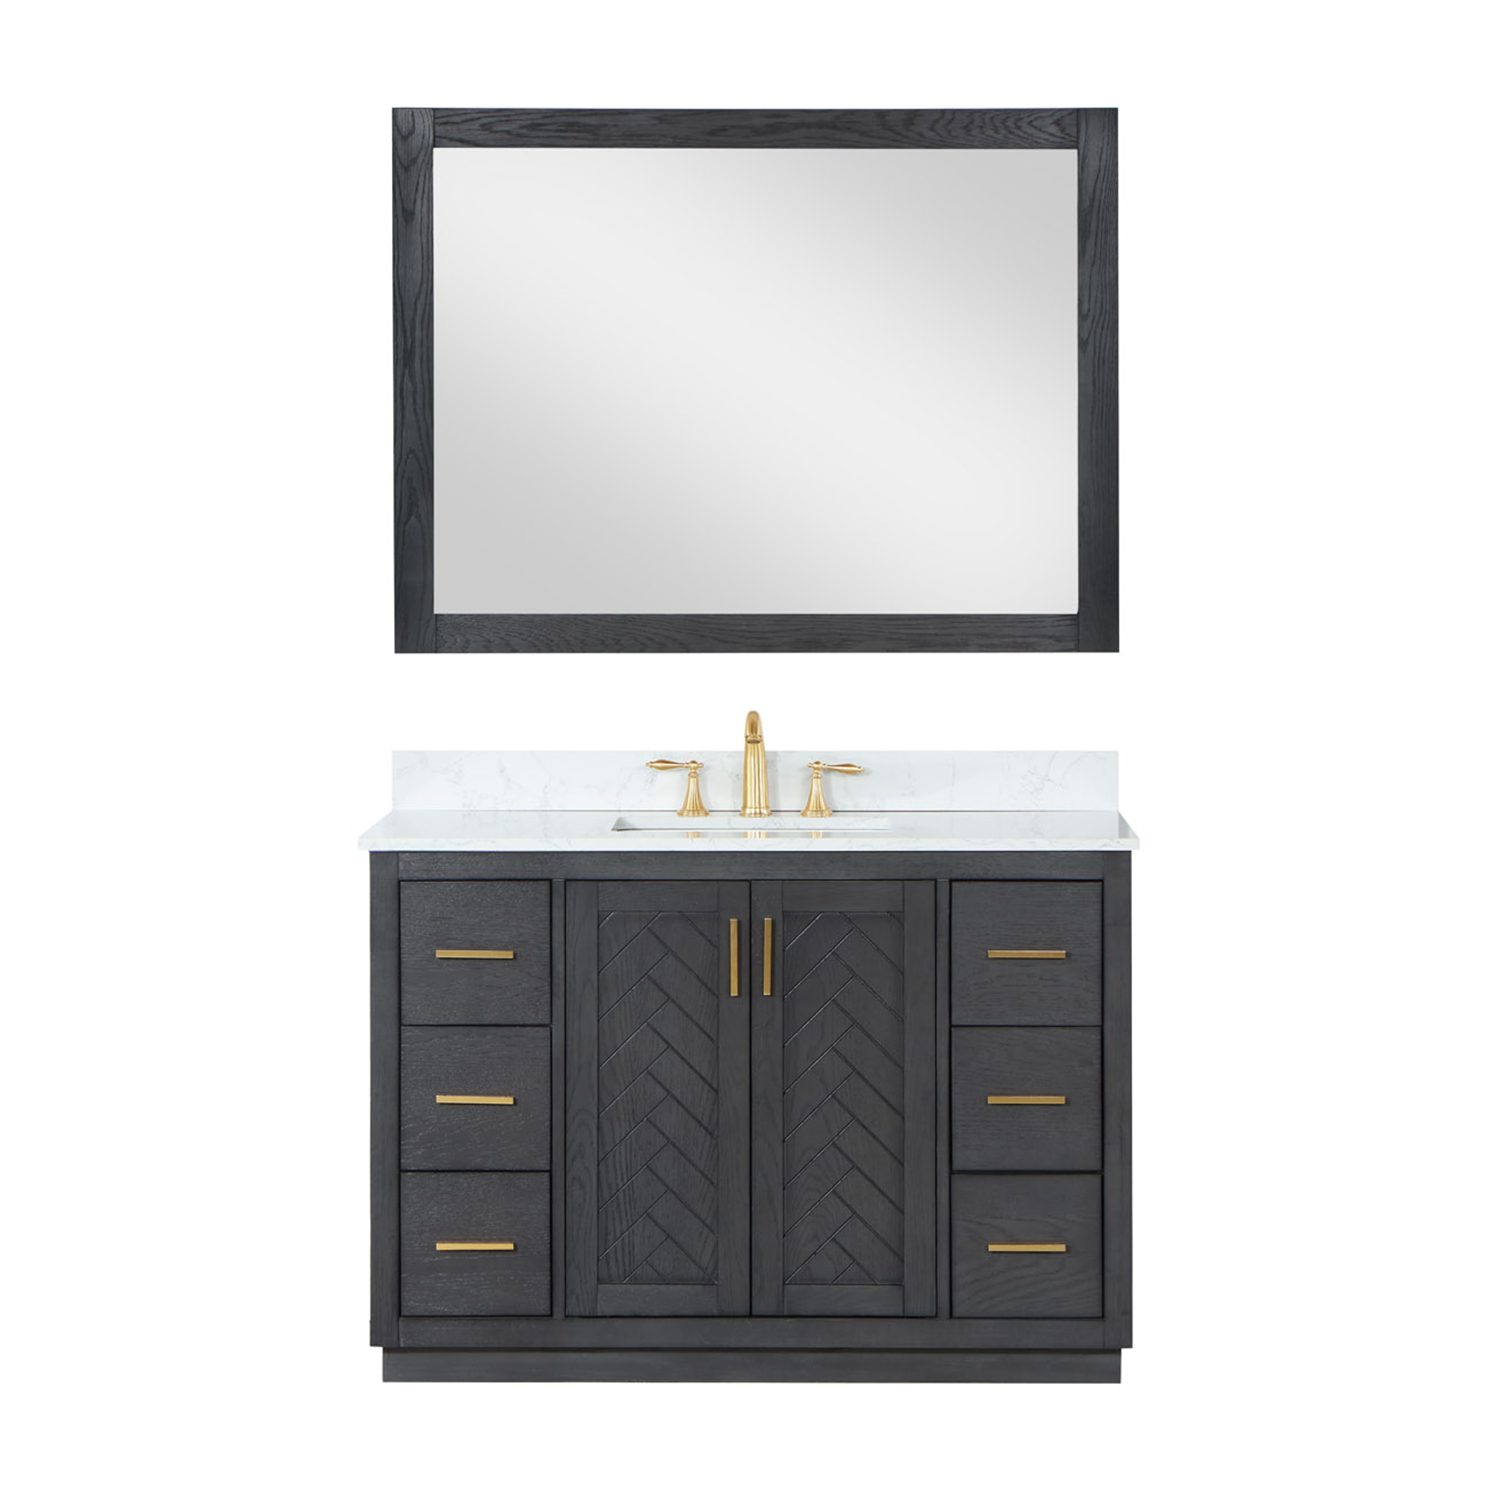 Issac Edwards Collection 48" Single Bathroom Vanity Set in Brown Oak with Grain White Composite Stone Countertop without Mirror 